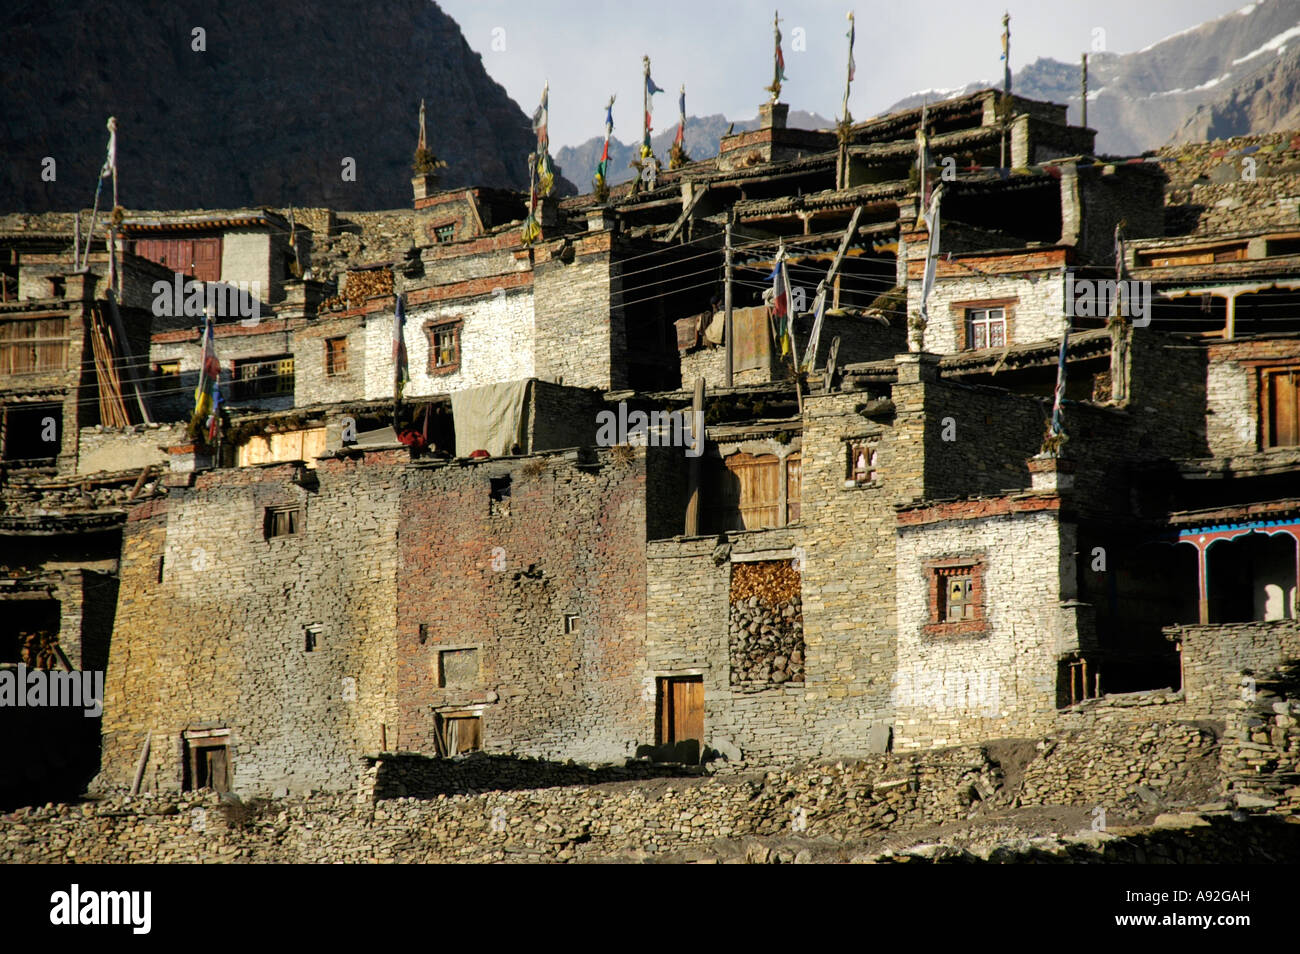 Nested houses made of stones with flat roofs and prayer flags Nar Nar-Phu Annapurna Region Nepal Stock Photo